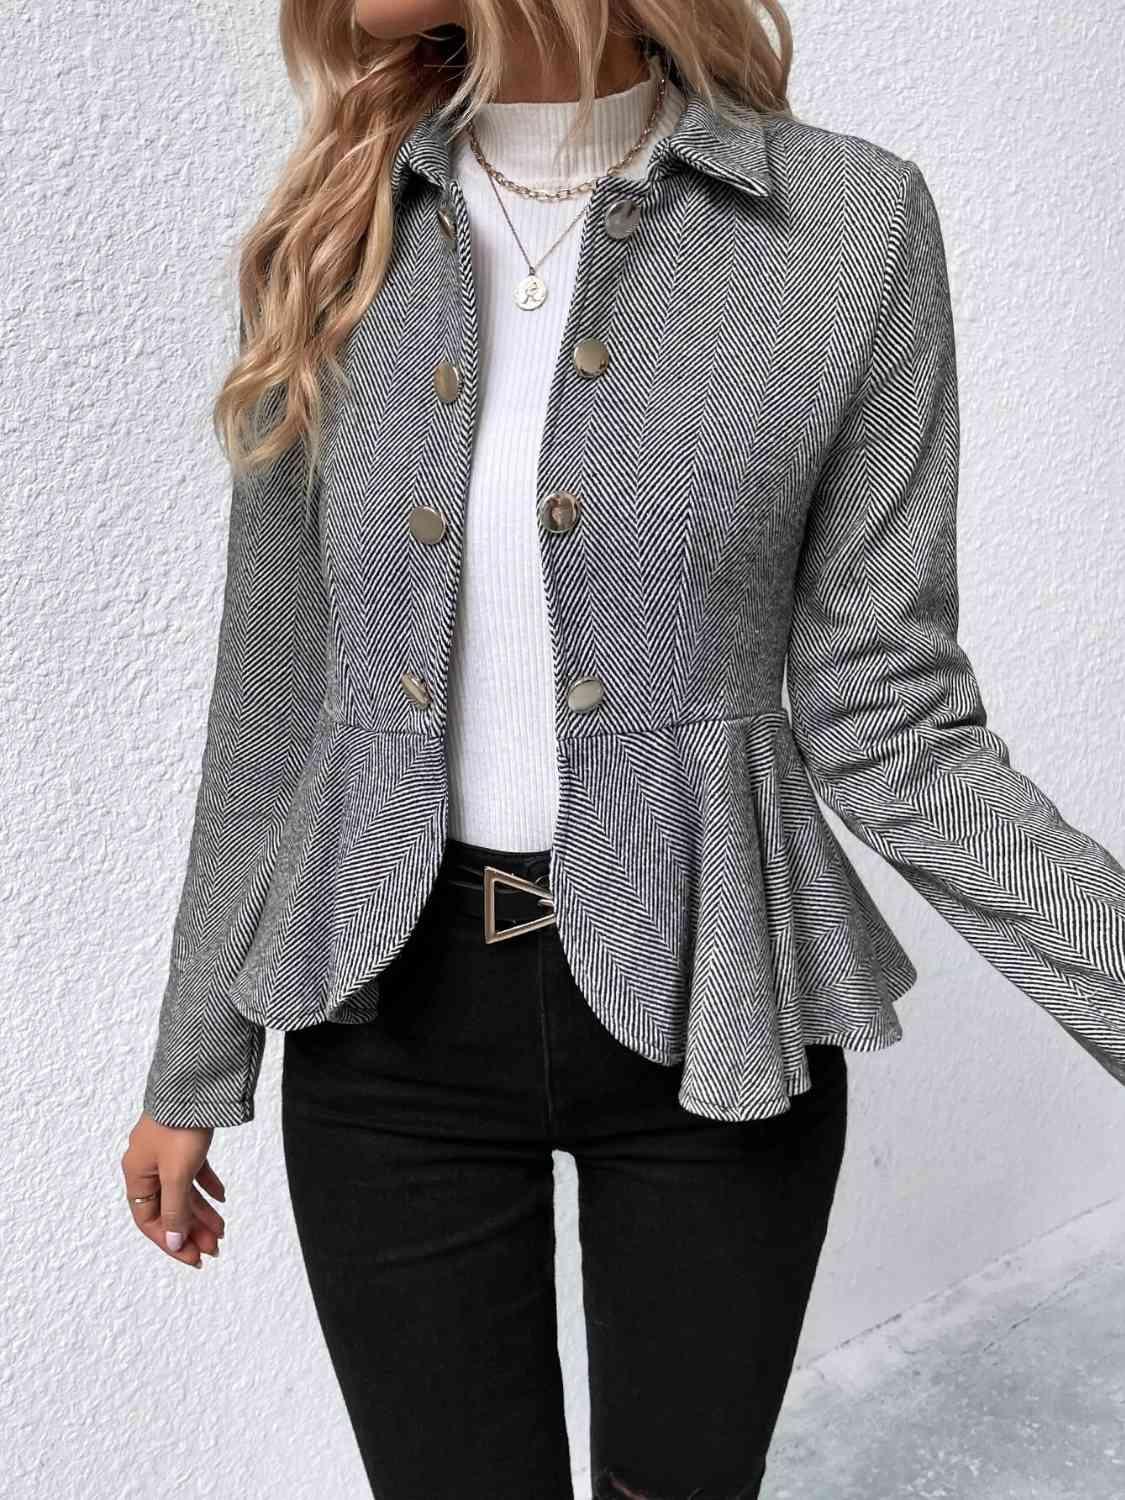 a woman wearing a gray jacket and black jeans